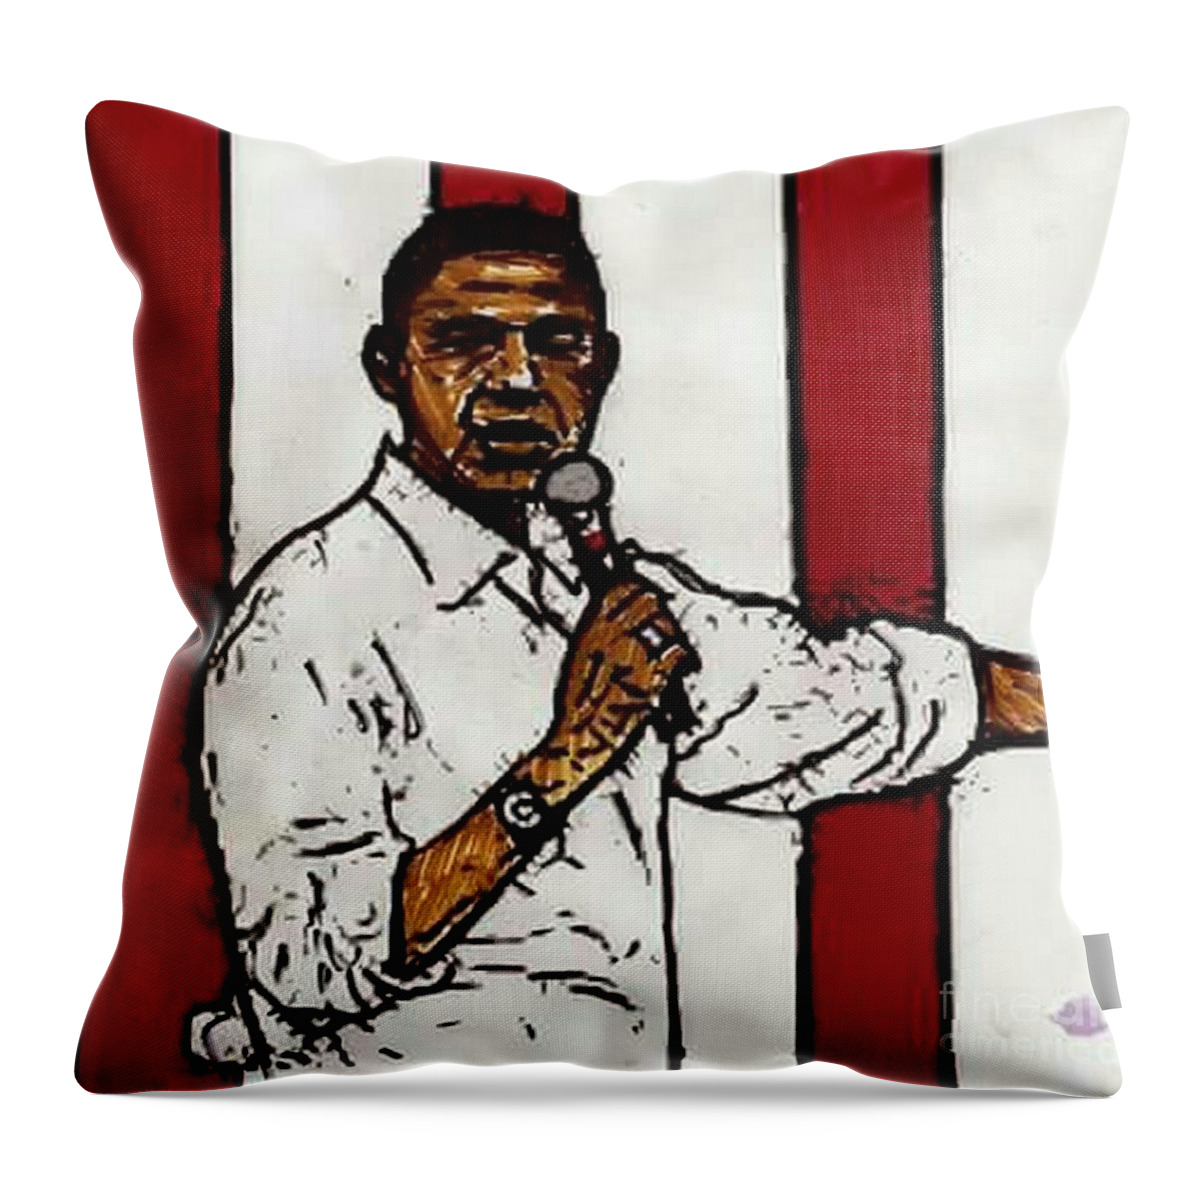  Throw Pillow featuring the painting Pres. O by Tyrone Hart